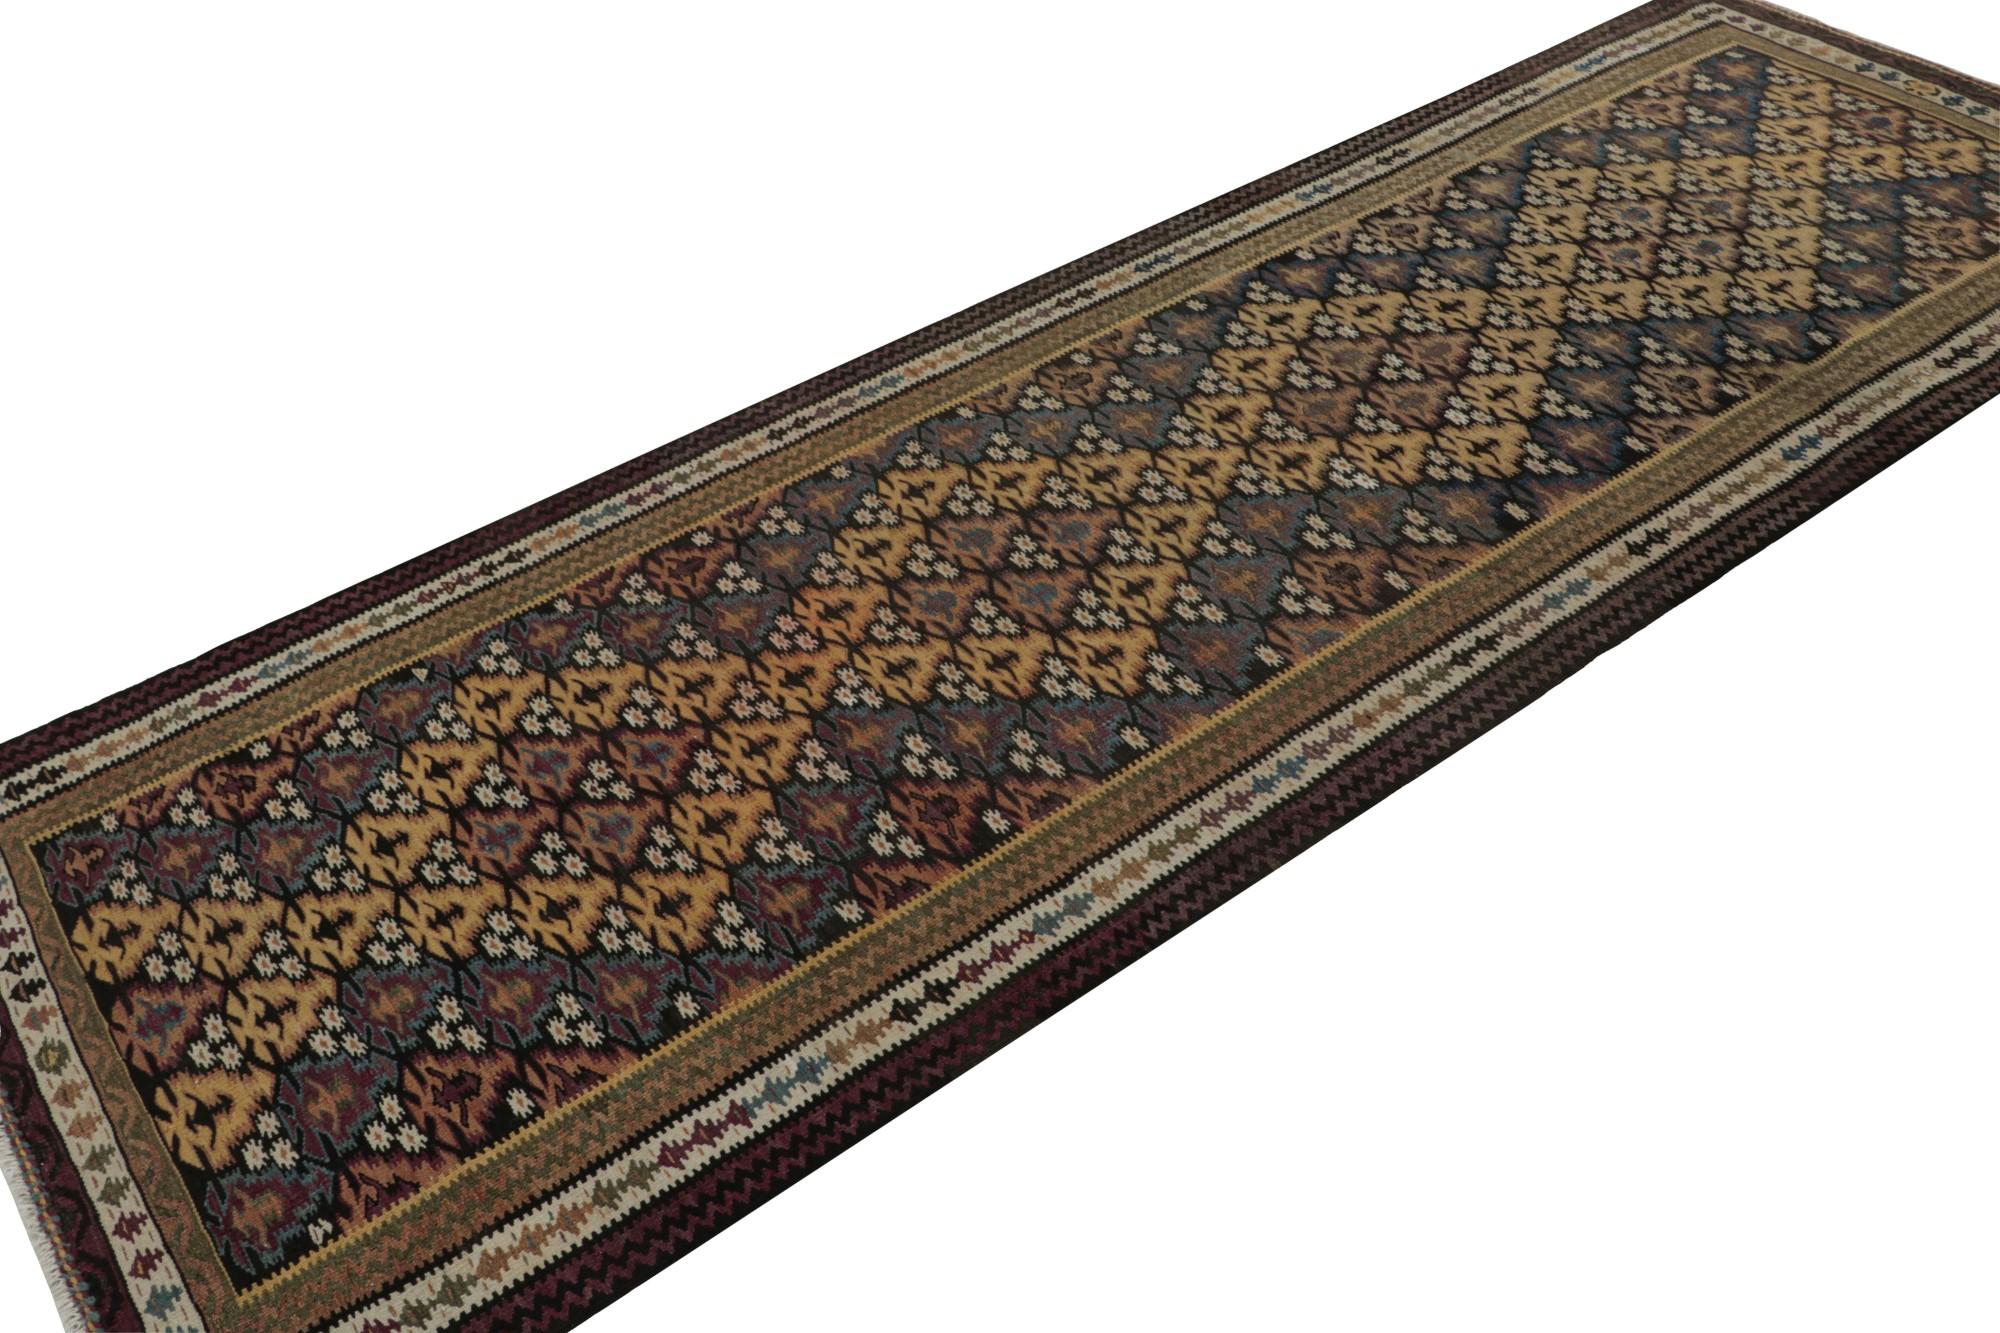 Handwoven in wool circa 1950-1960, this 3x10 vintage Kilim runner rug is a new curation from Rug & Kilim’s primitivist flatweaves. 

On the Design:

This runner boasts polychromatic geometric patterns with notable brown, blue and gold hues. It’s a